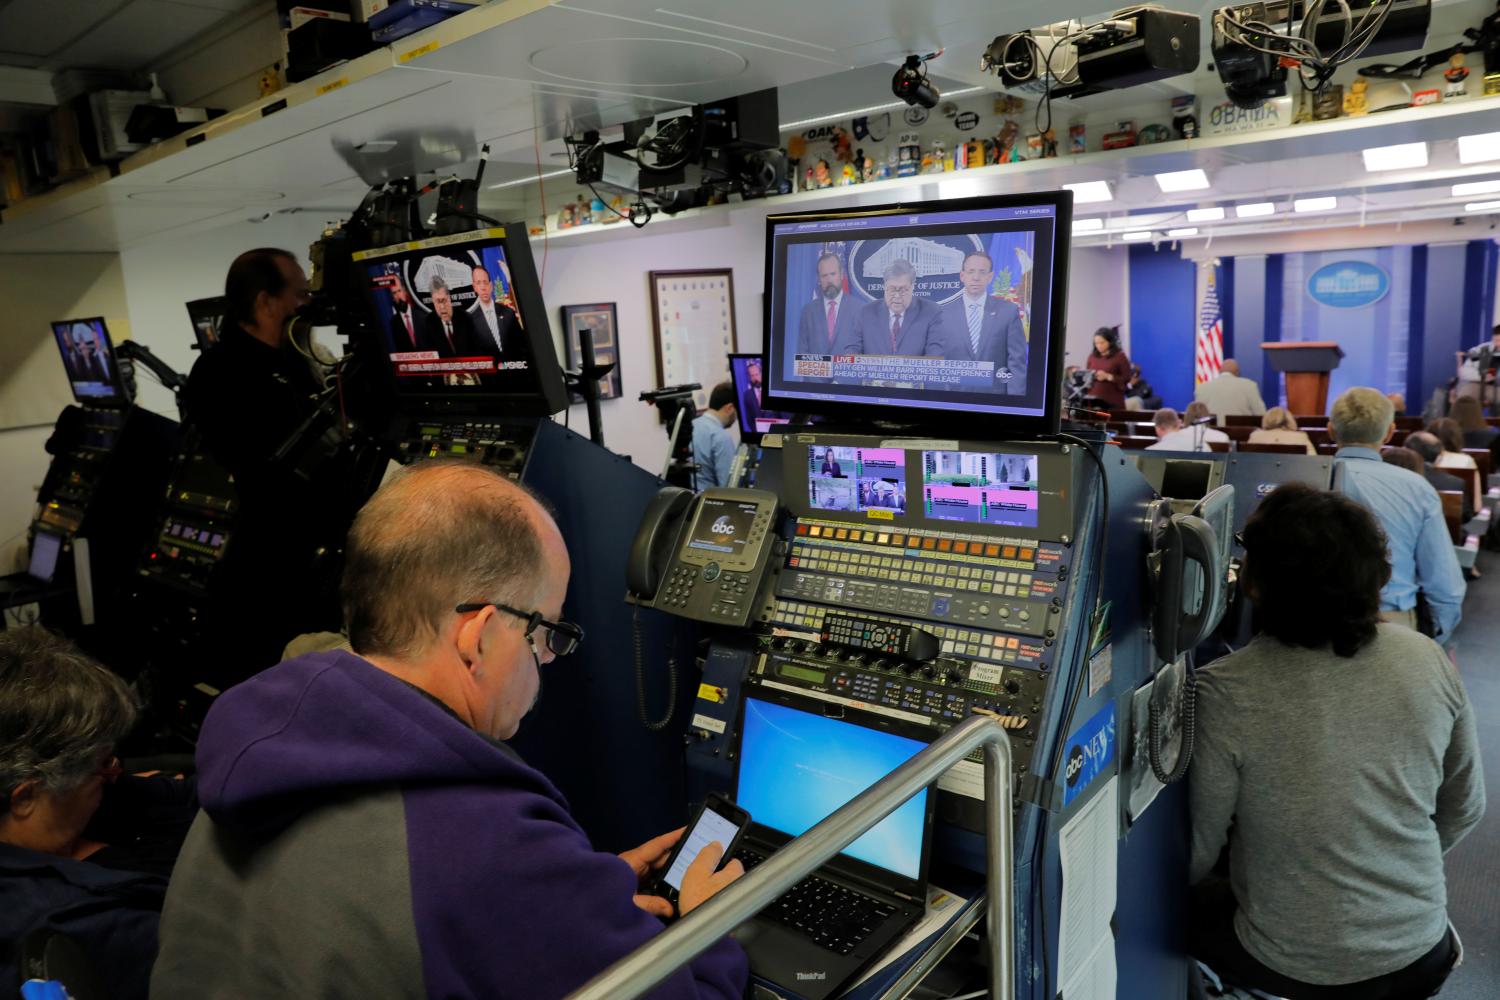 The news media gathers for a briefing at the White House before the release of Special Counsel Robert Mueller's report on Russian interference in the 2016 U.S. presidential election, in Washington, U.S., April 18, 2019.  REUTERS/Lucas Jackson - RC15C04B0100